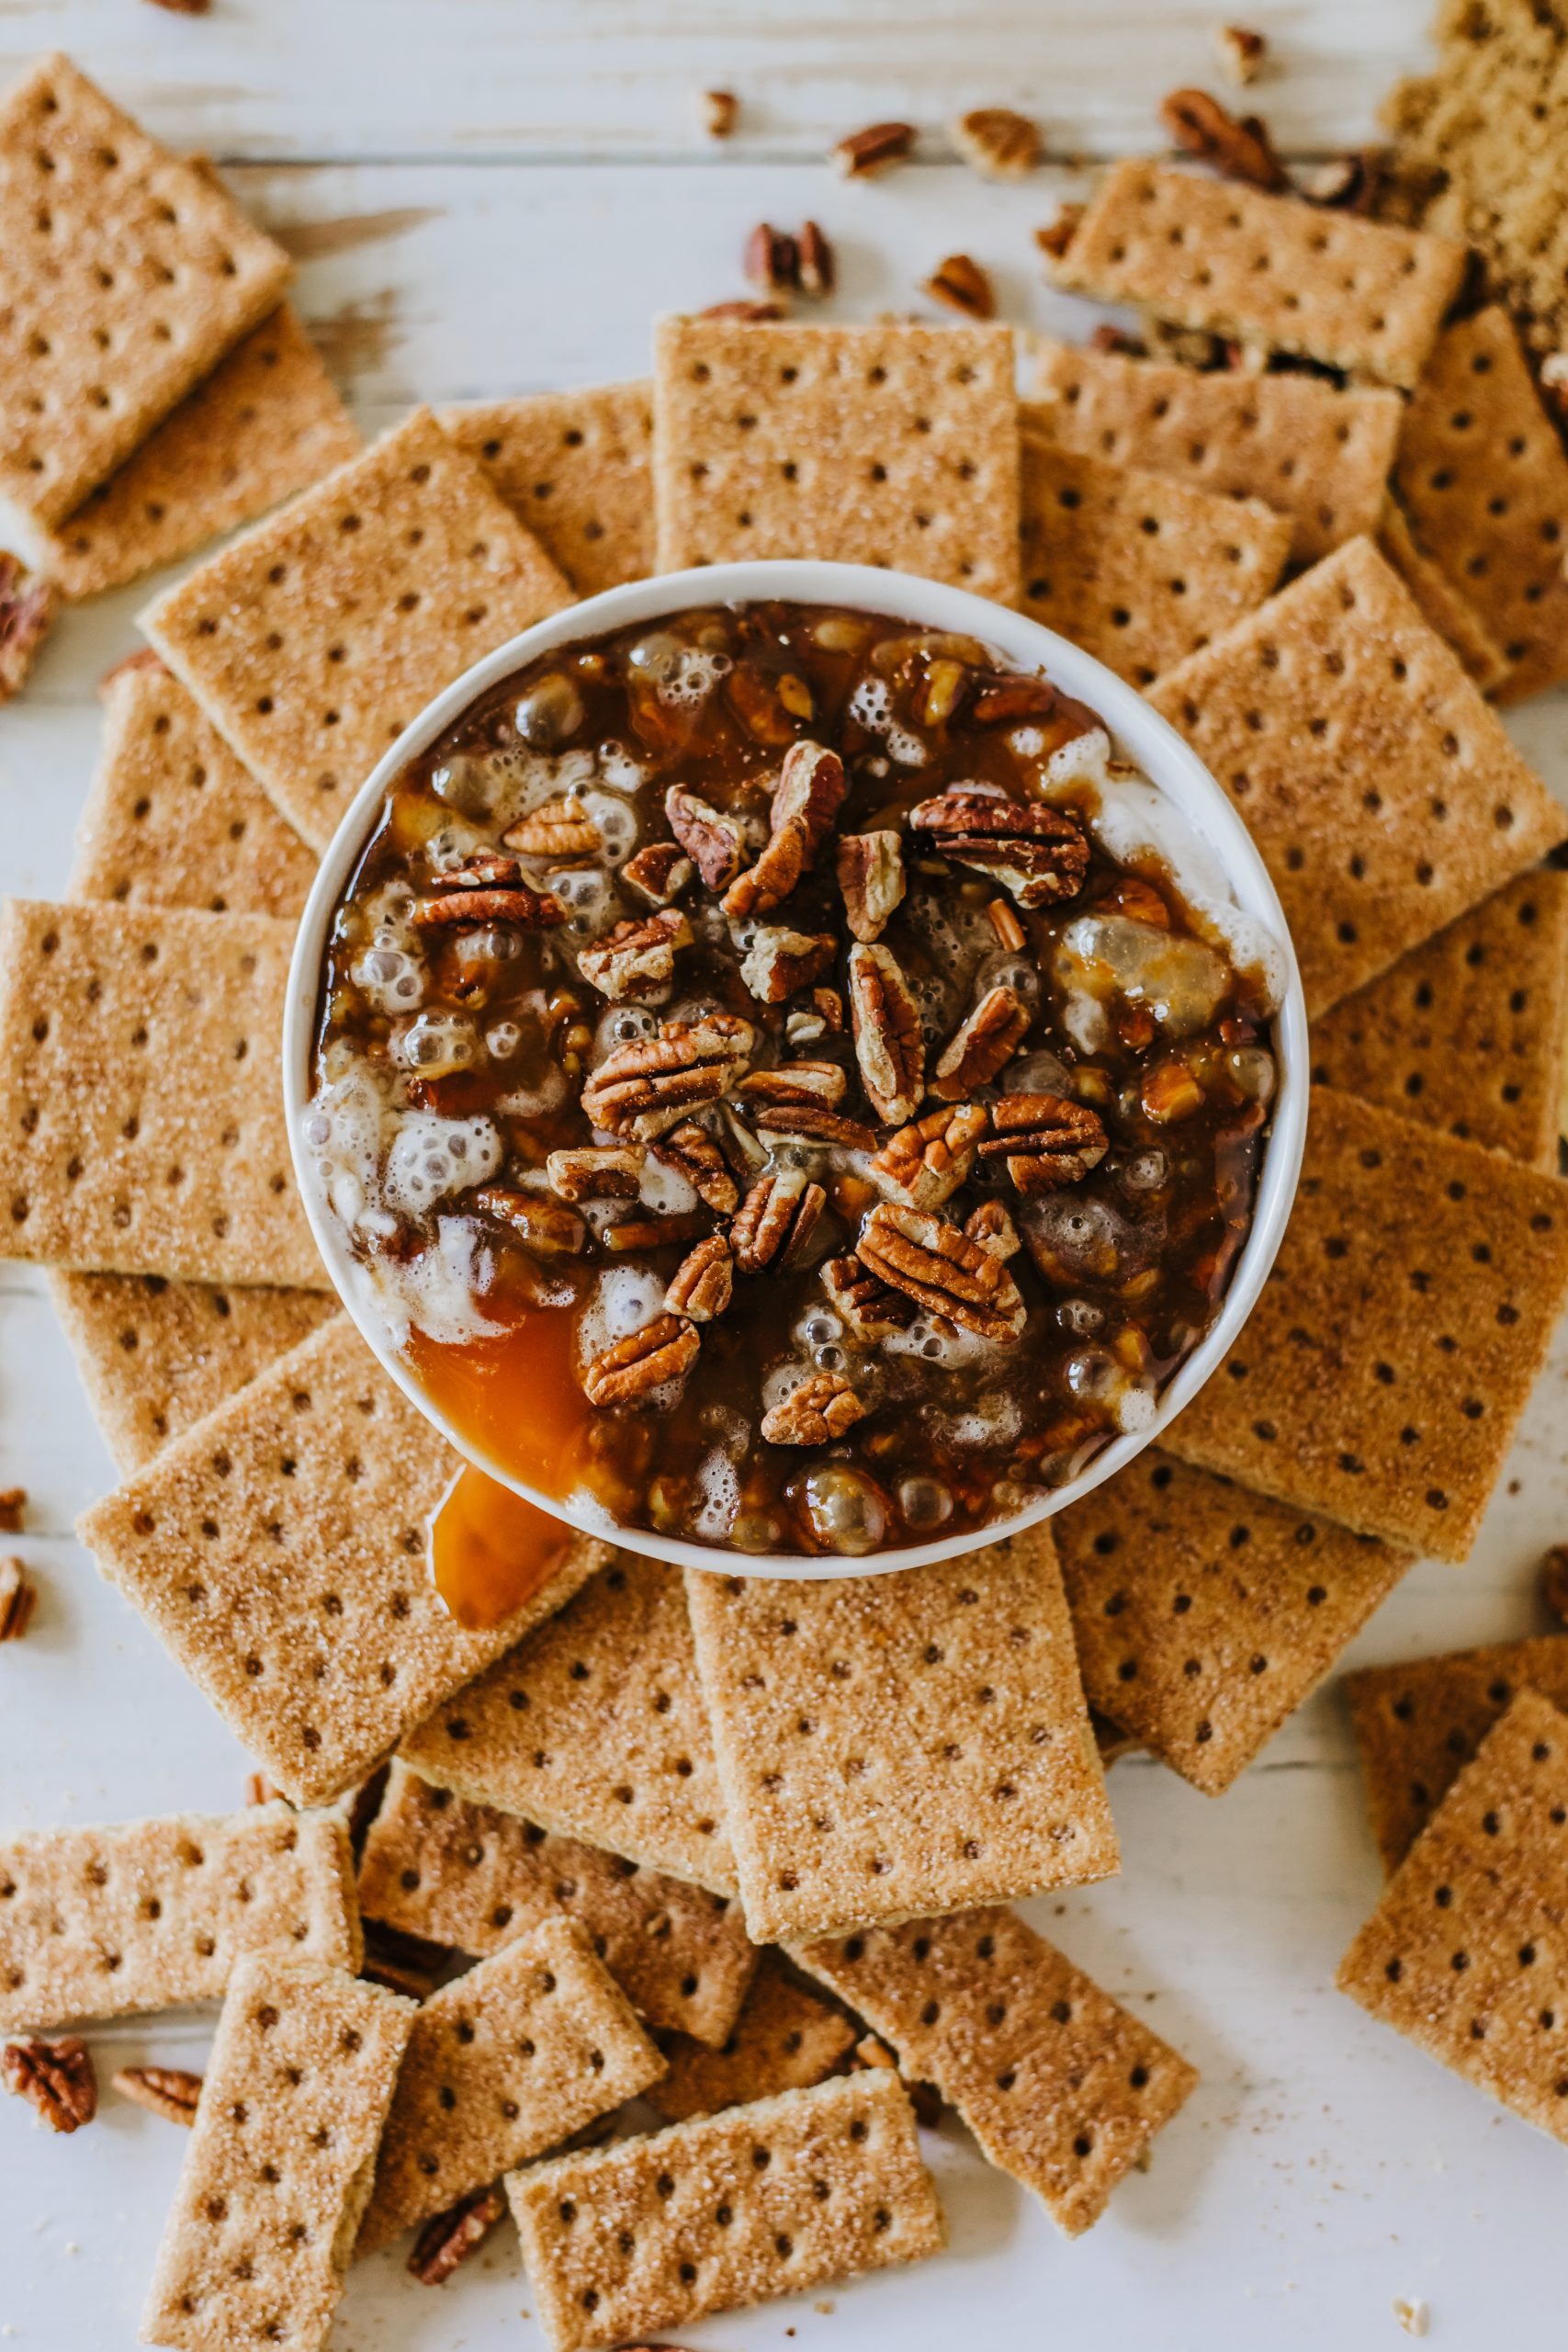 A bowl filled with No Bake Pecan Pie Dip with Cream Cheese surrounded by graham crackers. Two gold spoons are placed to the right.